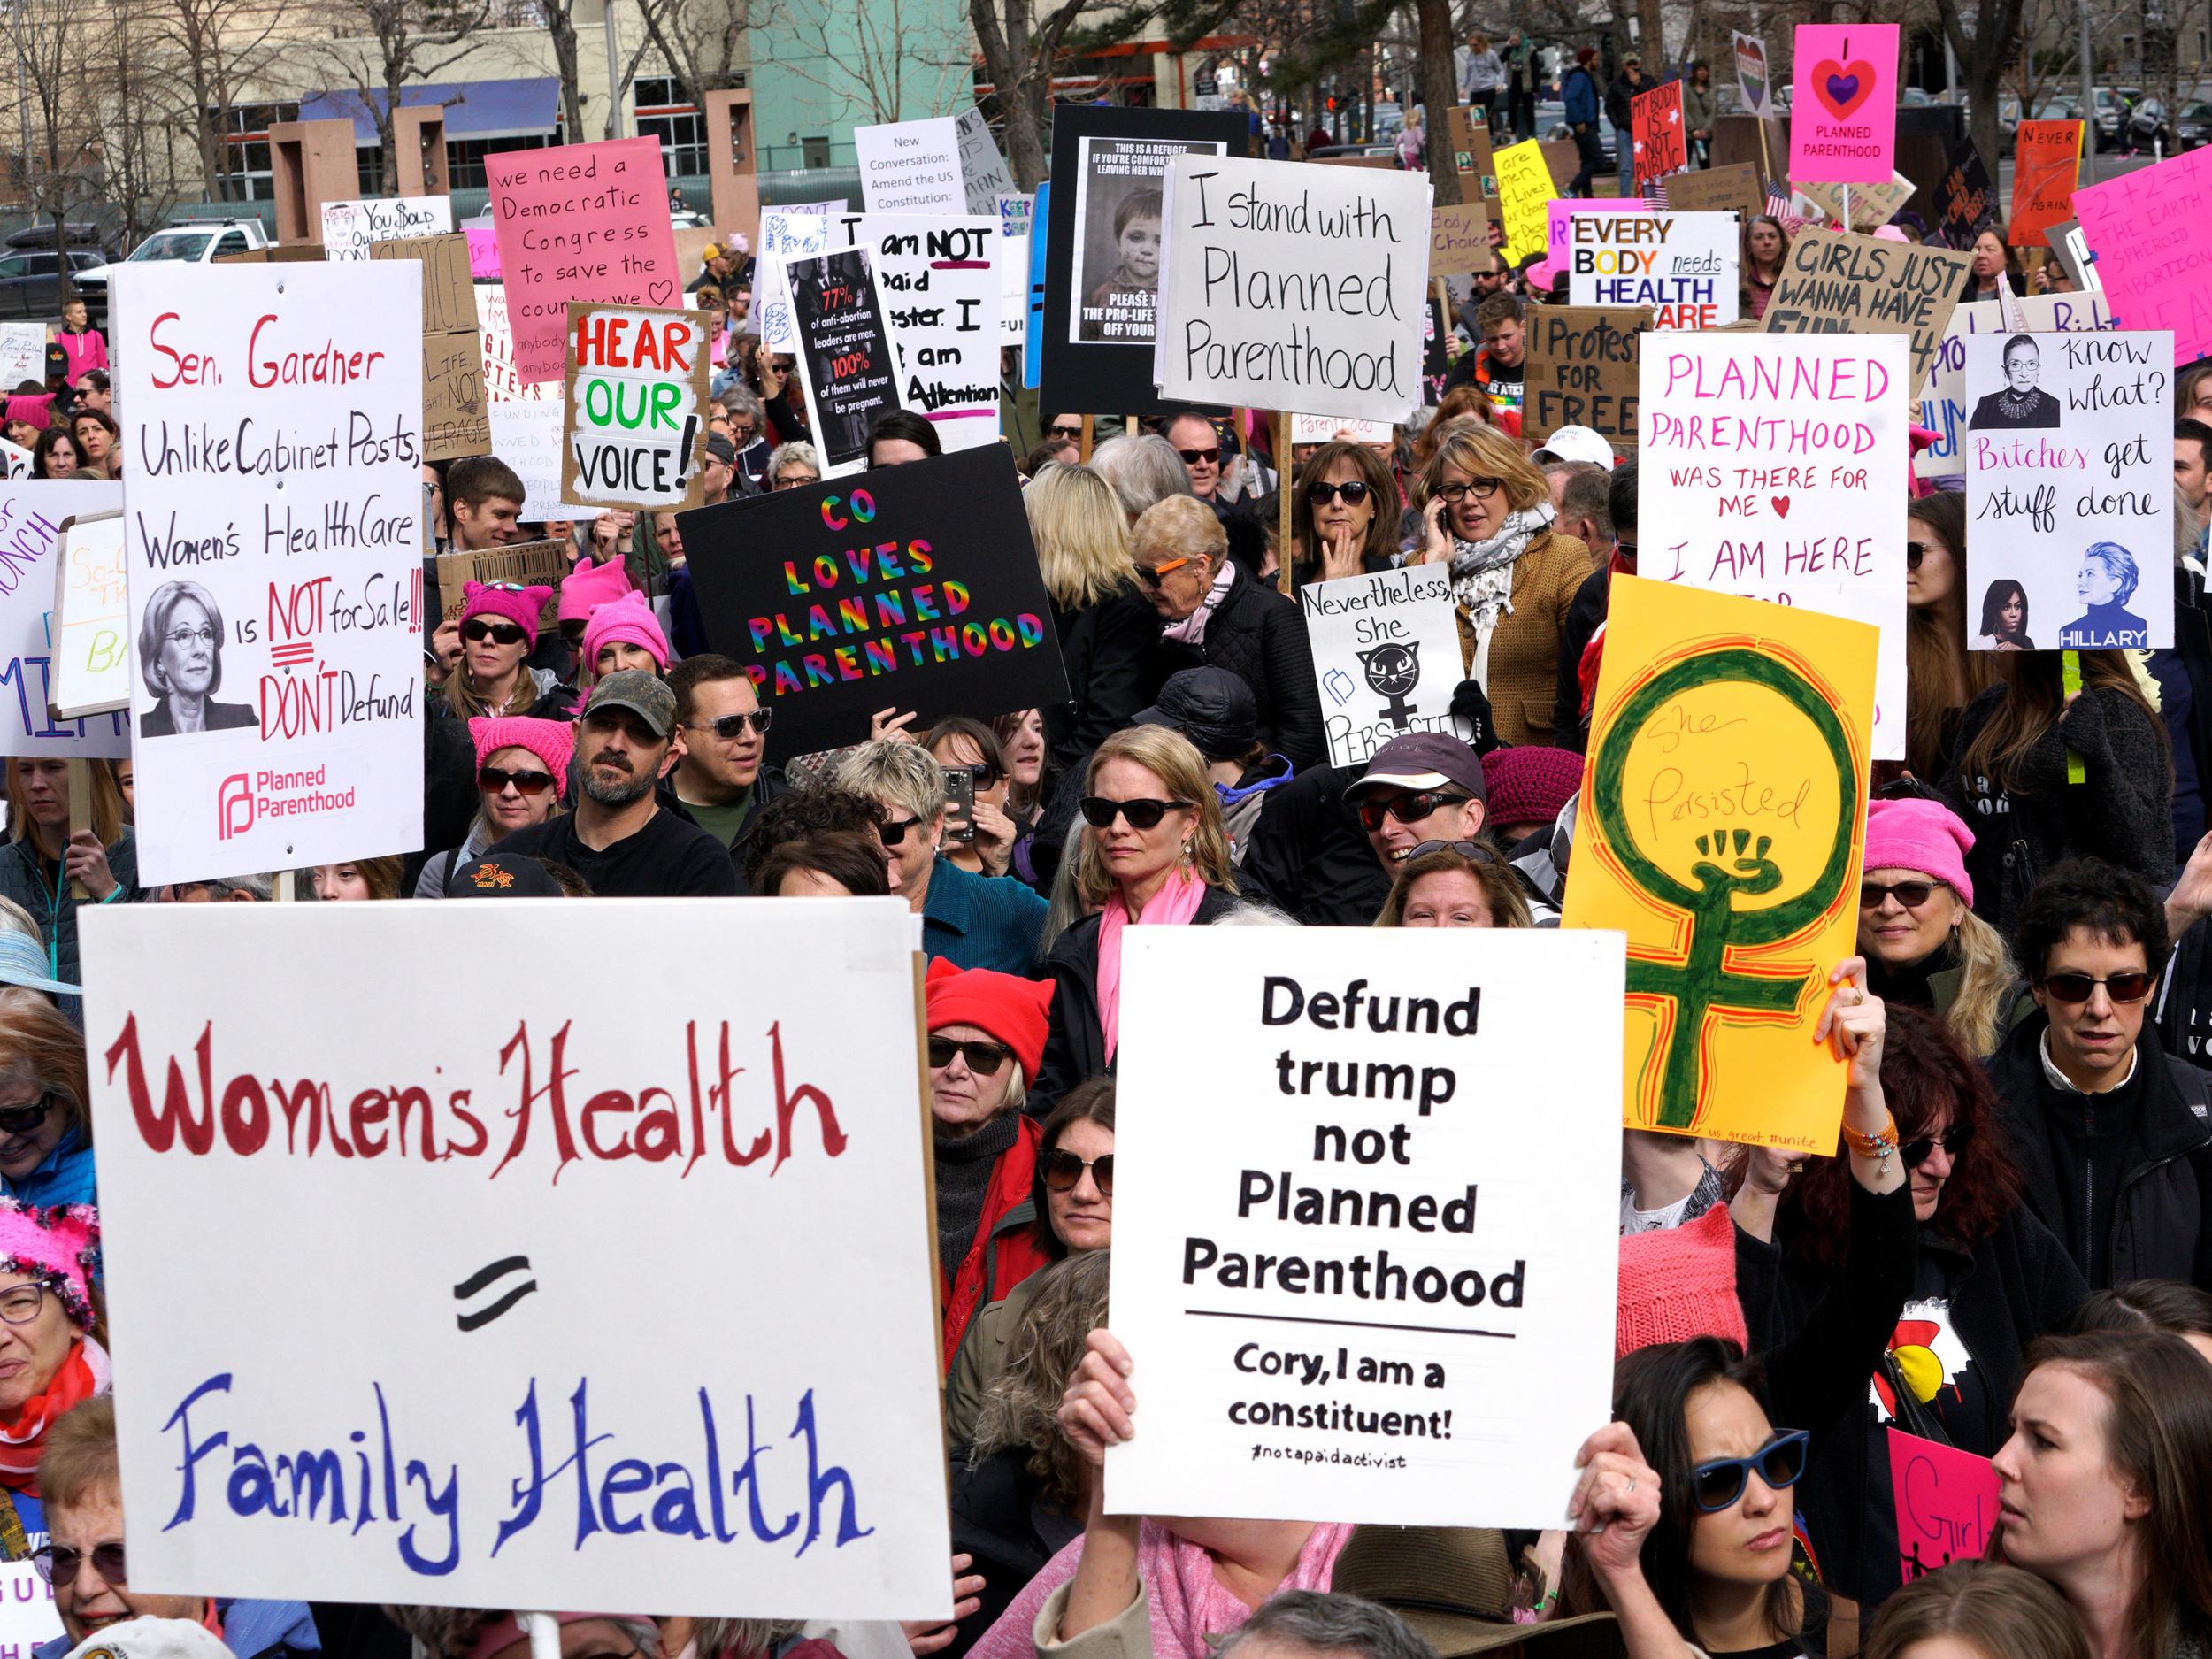 Planned Parenthood supporters hold signs at a protest in downtown Denver